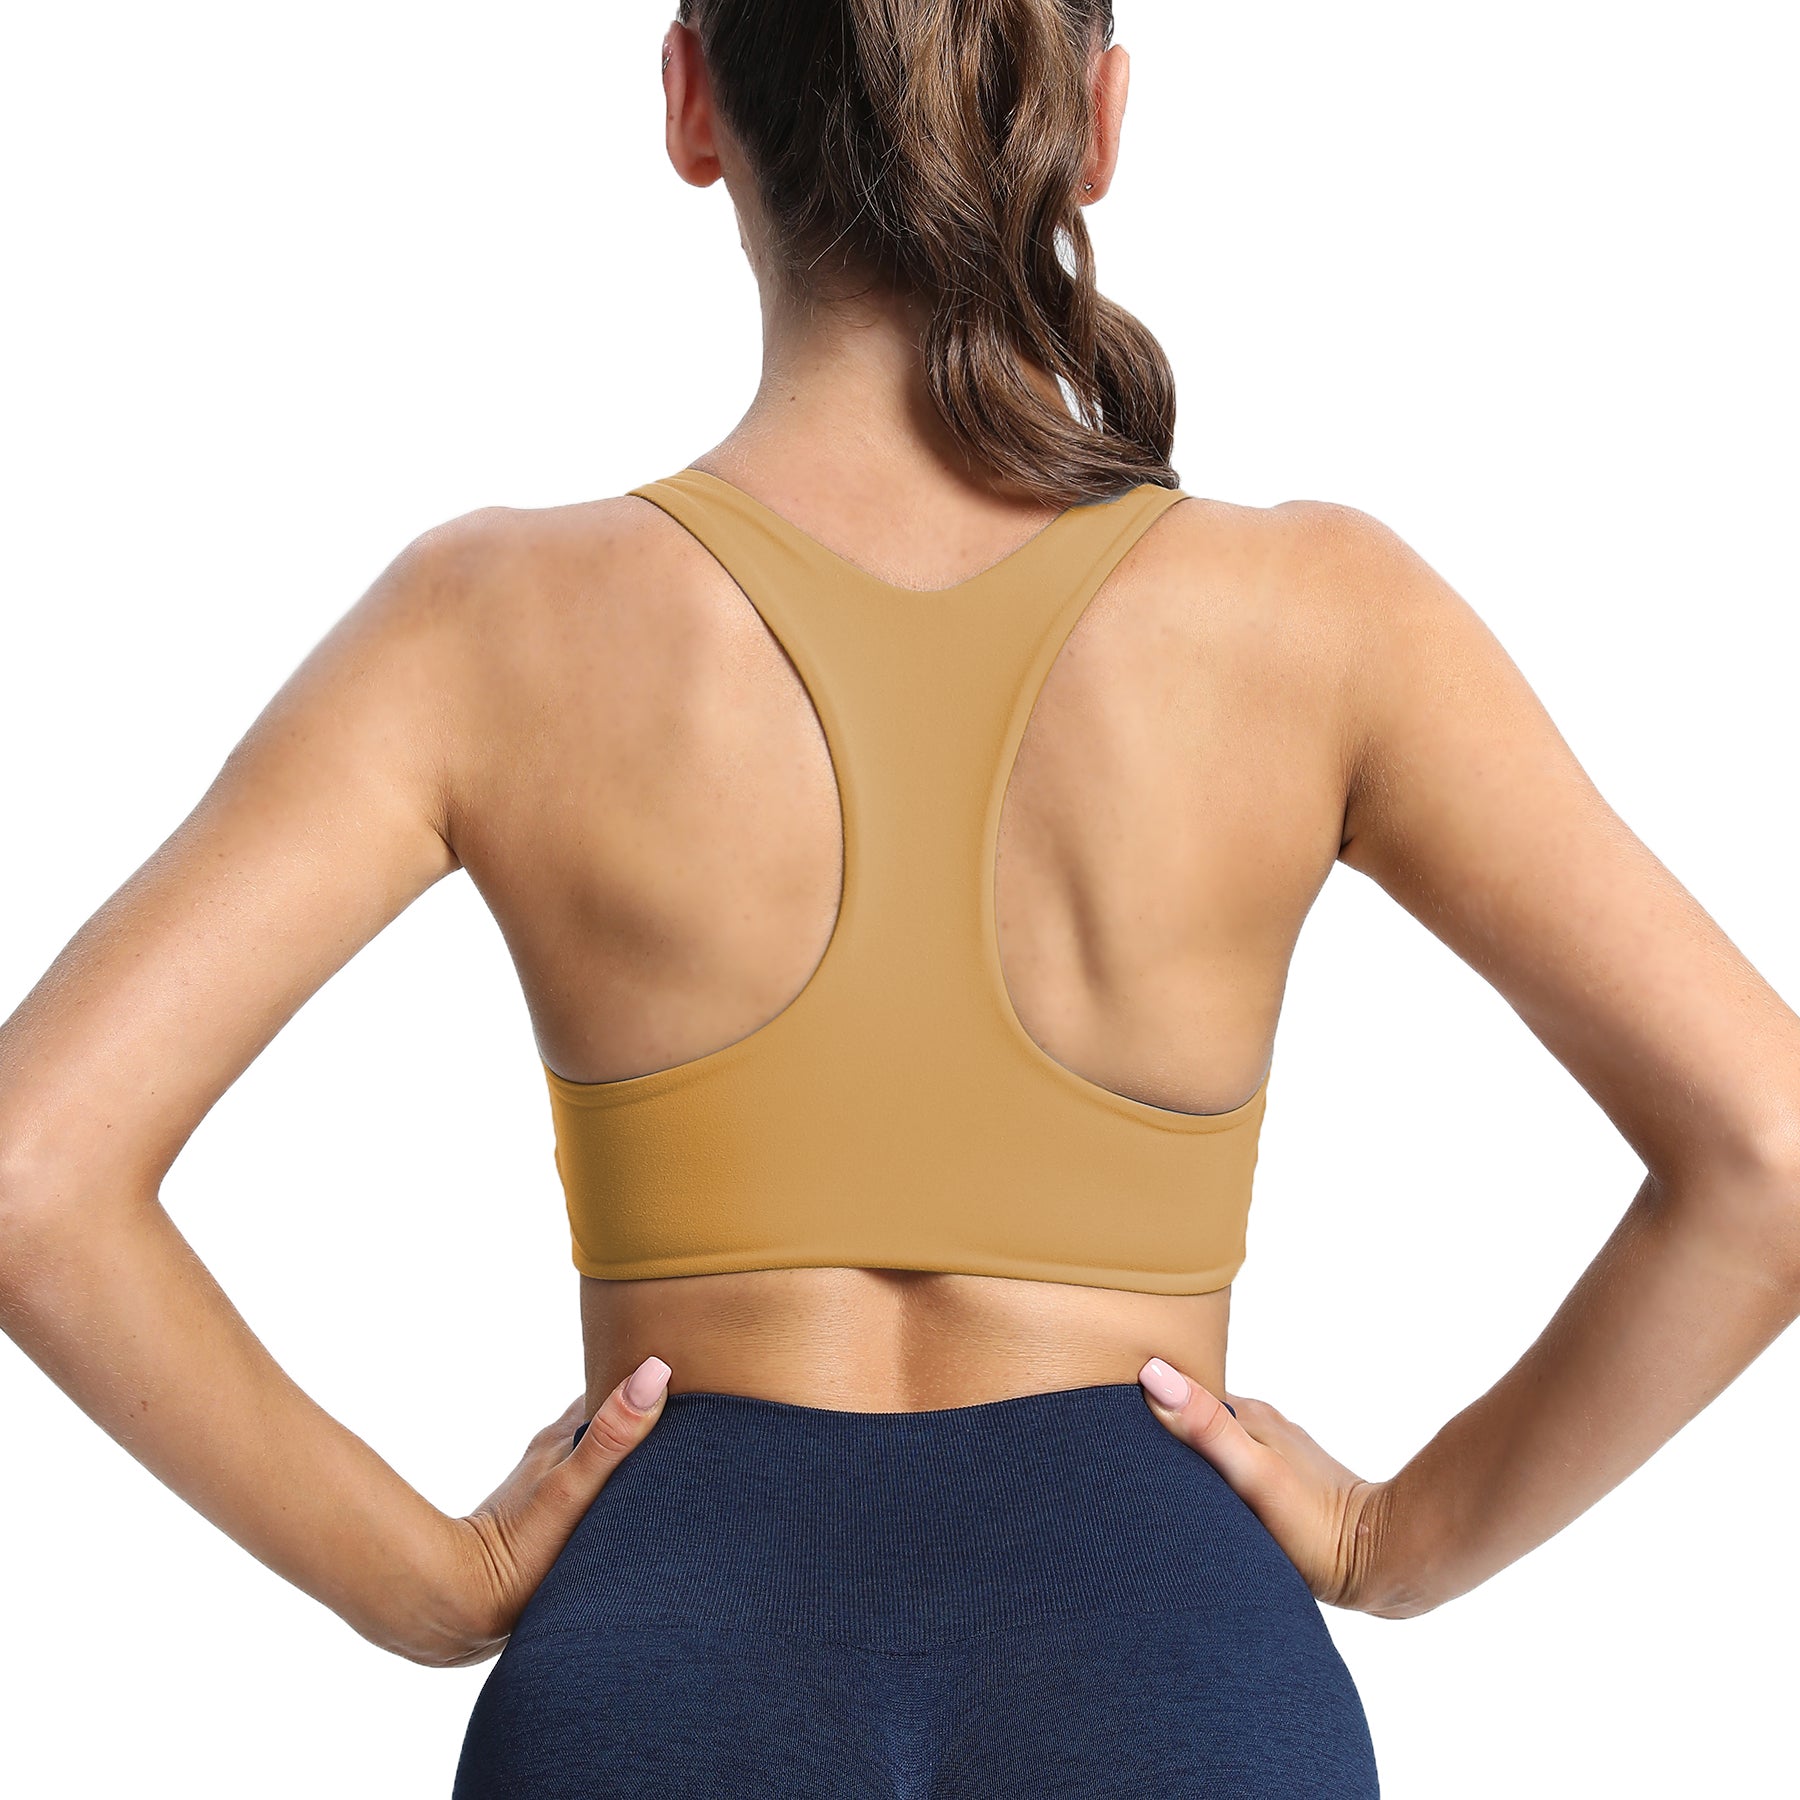 my all time favorite sports bras from aoxjox on !! #cutegymcloth